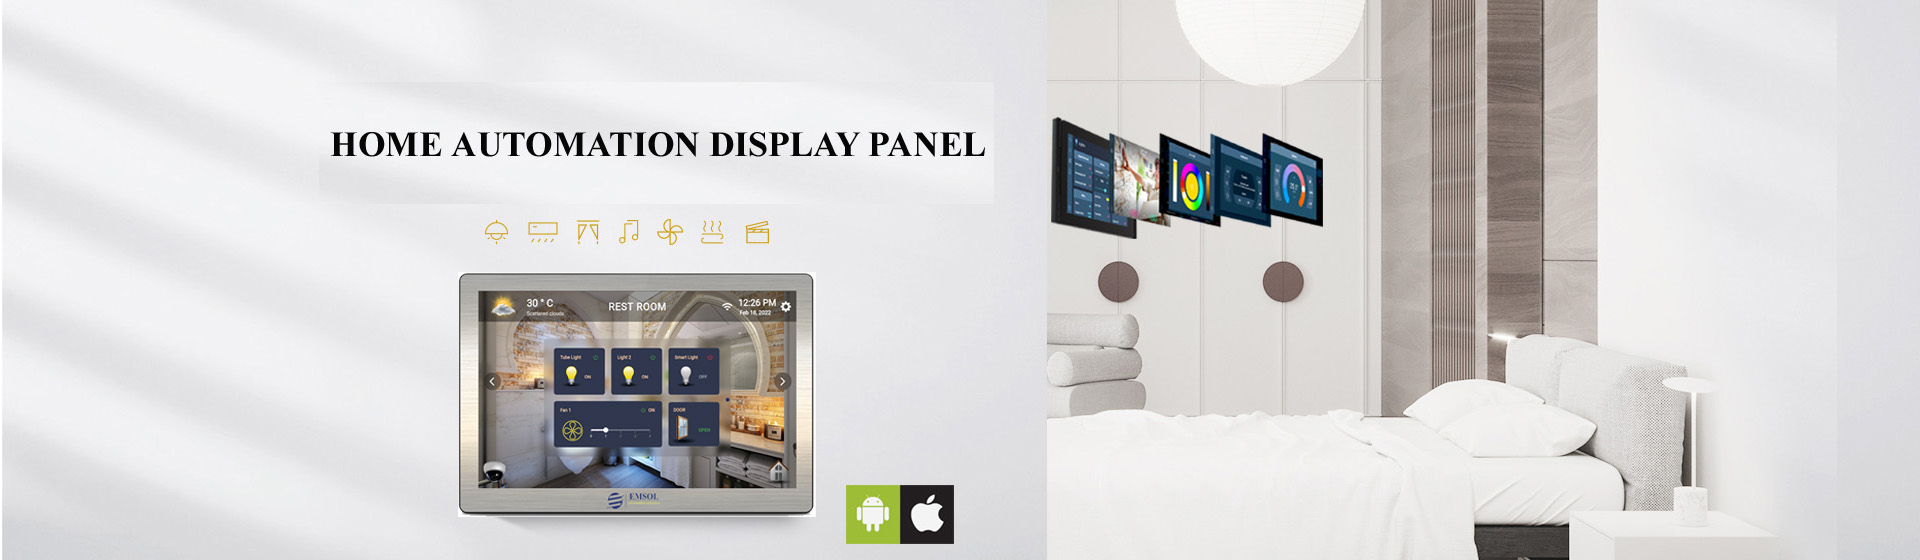 Home Automation Touch panel